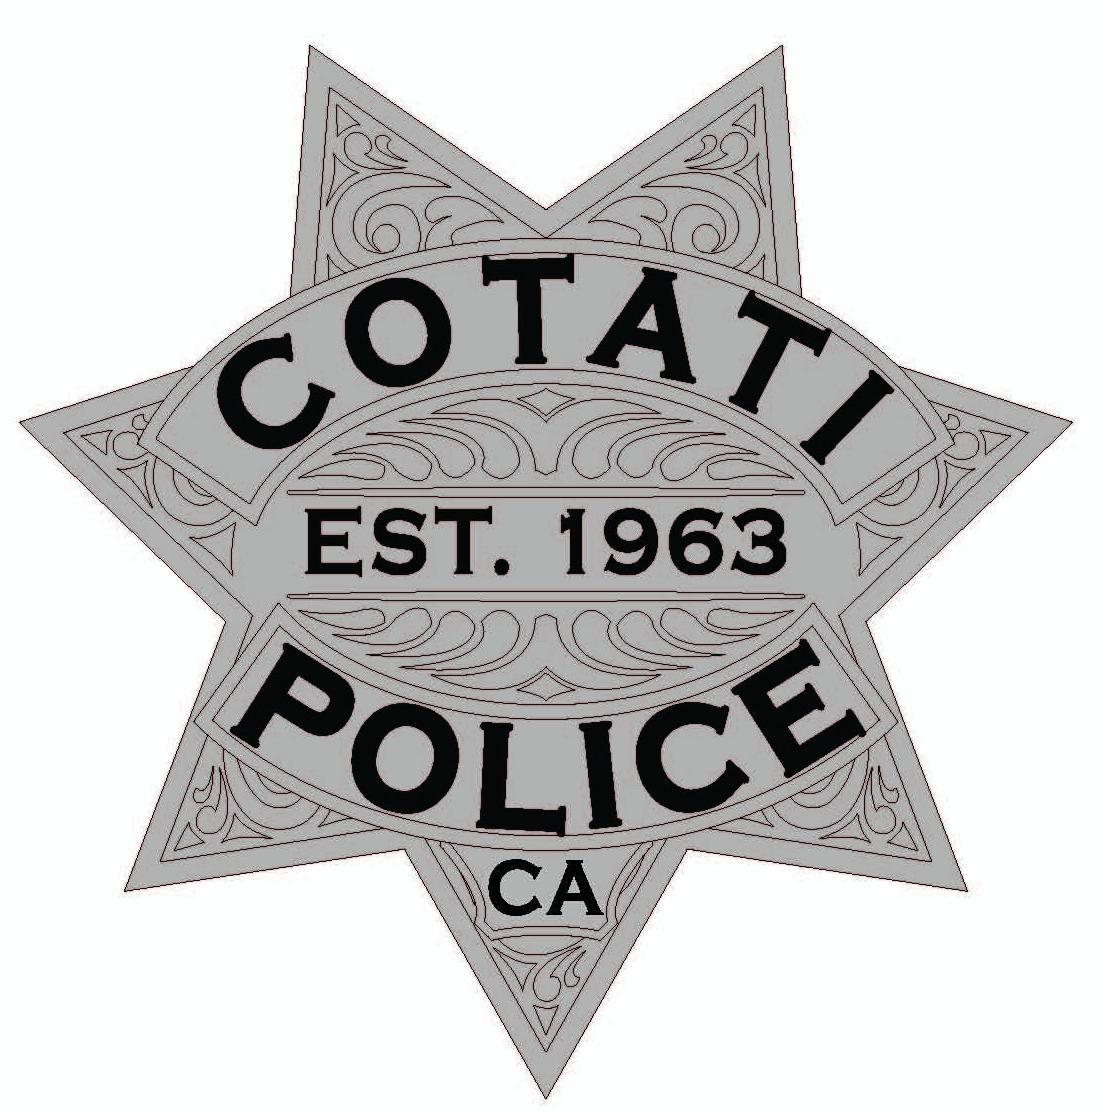 Official Cotati Police Department information - To report a crime or other emergency, call 911, for non-emergencies call 707-792-4611